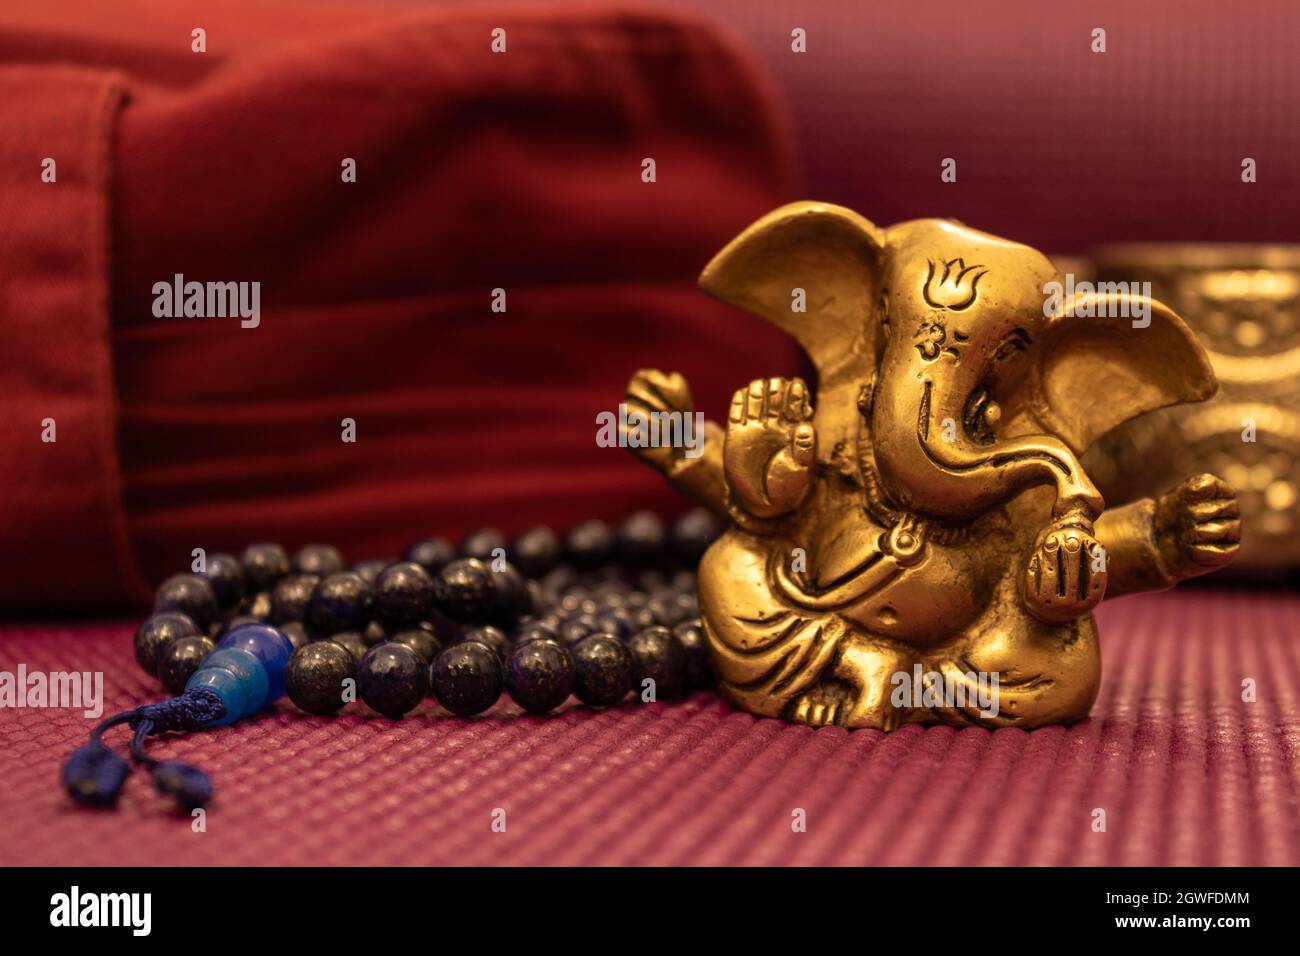 Close Up Of Golden Statue Of Ganesha On Yoga Mat With Blue Prayer Beads And  Yoga Pillow Stock Photo - Alamy